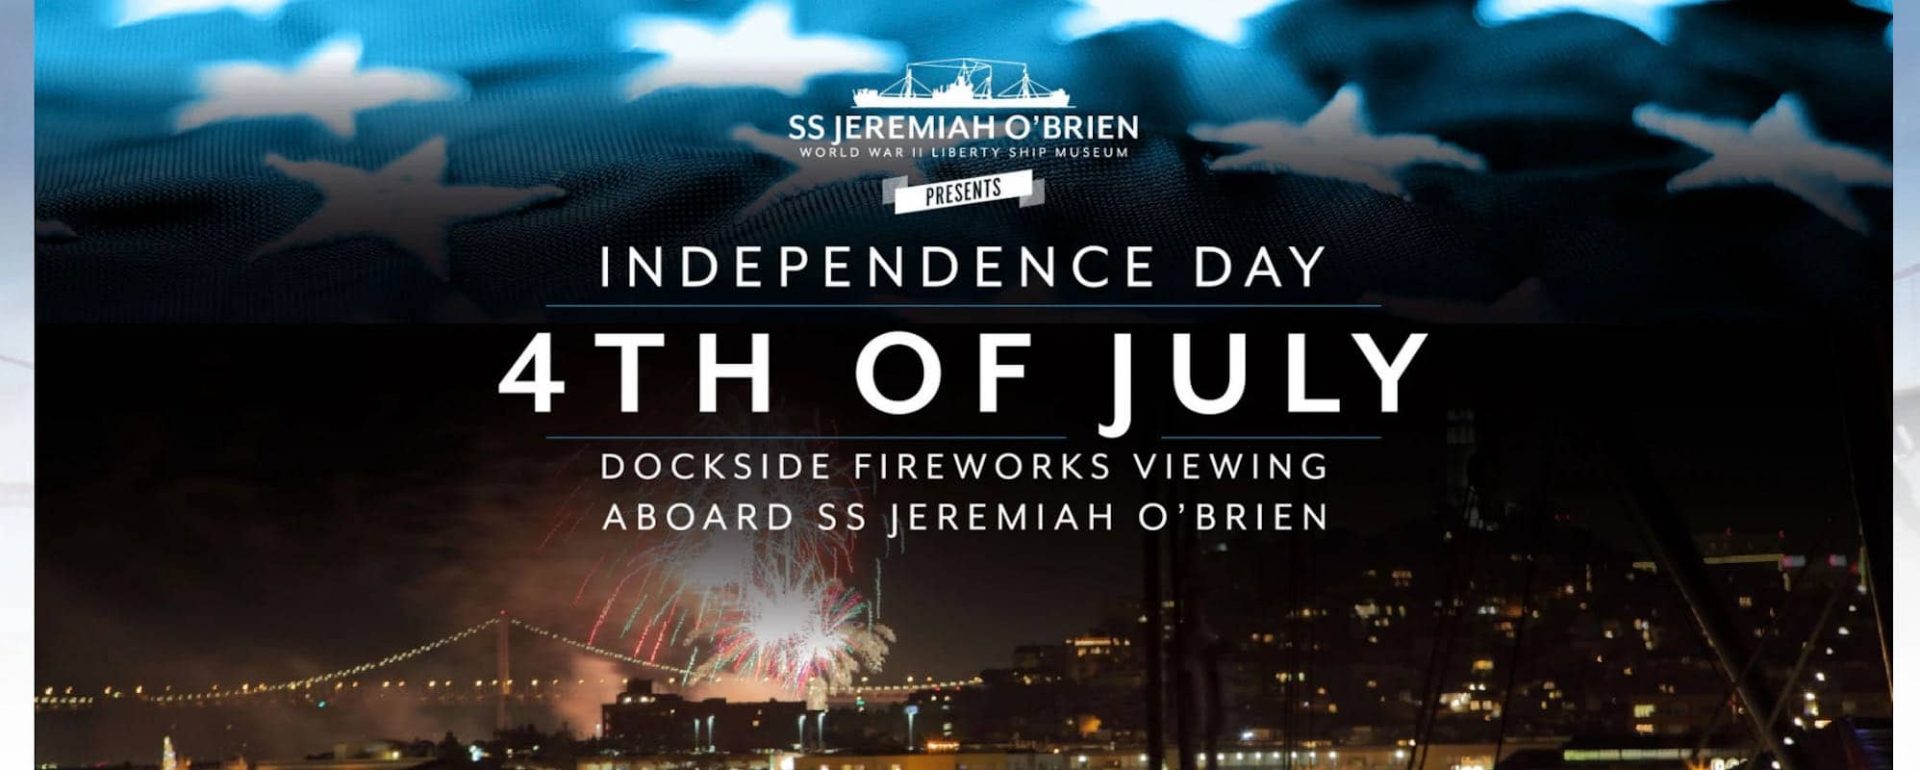 SS Jeremiah Fireworks Viewing Party